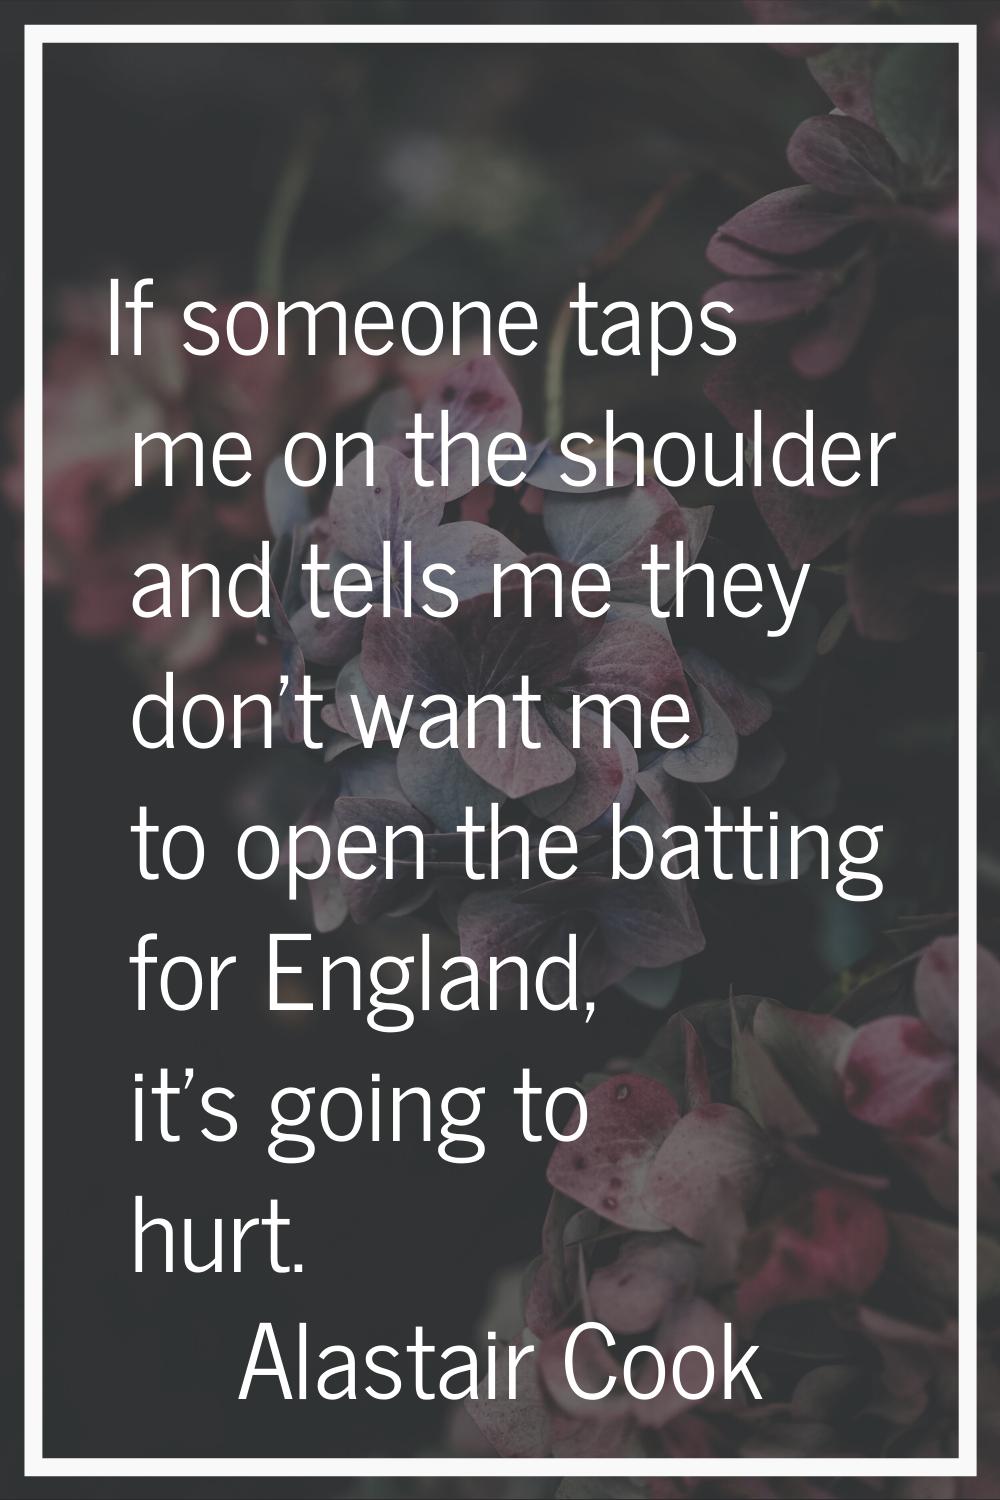 If someone taps me on the shoulder and tells me they don't want me to open the batting for England,